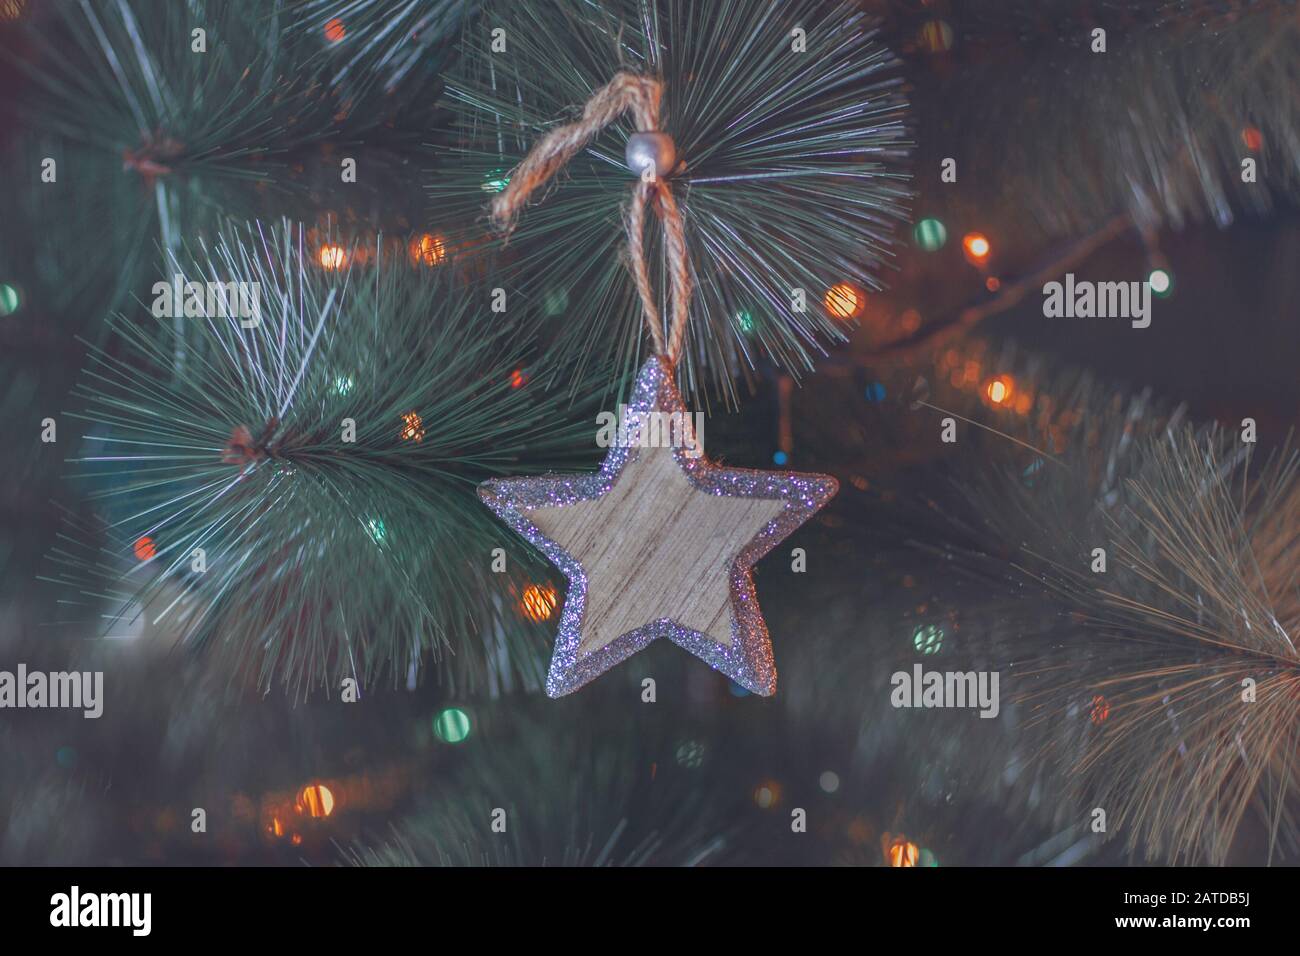 Close-up of a Christmas star hanging on a Christmas tree Stock Photo